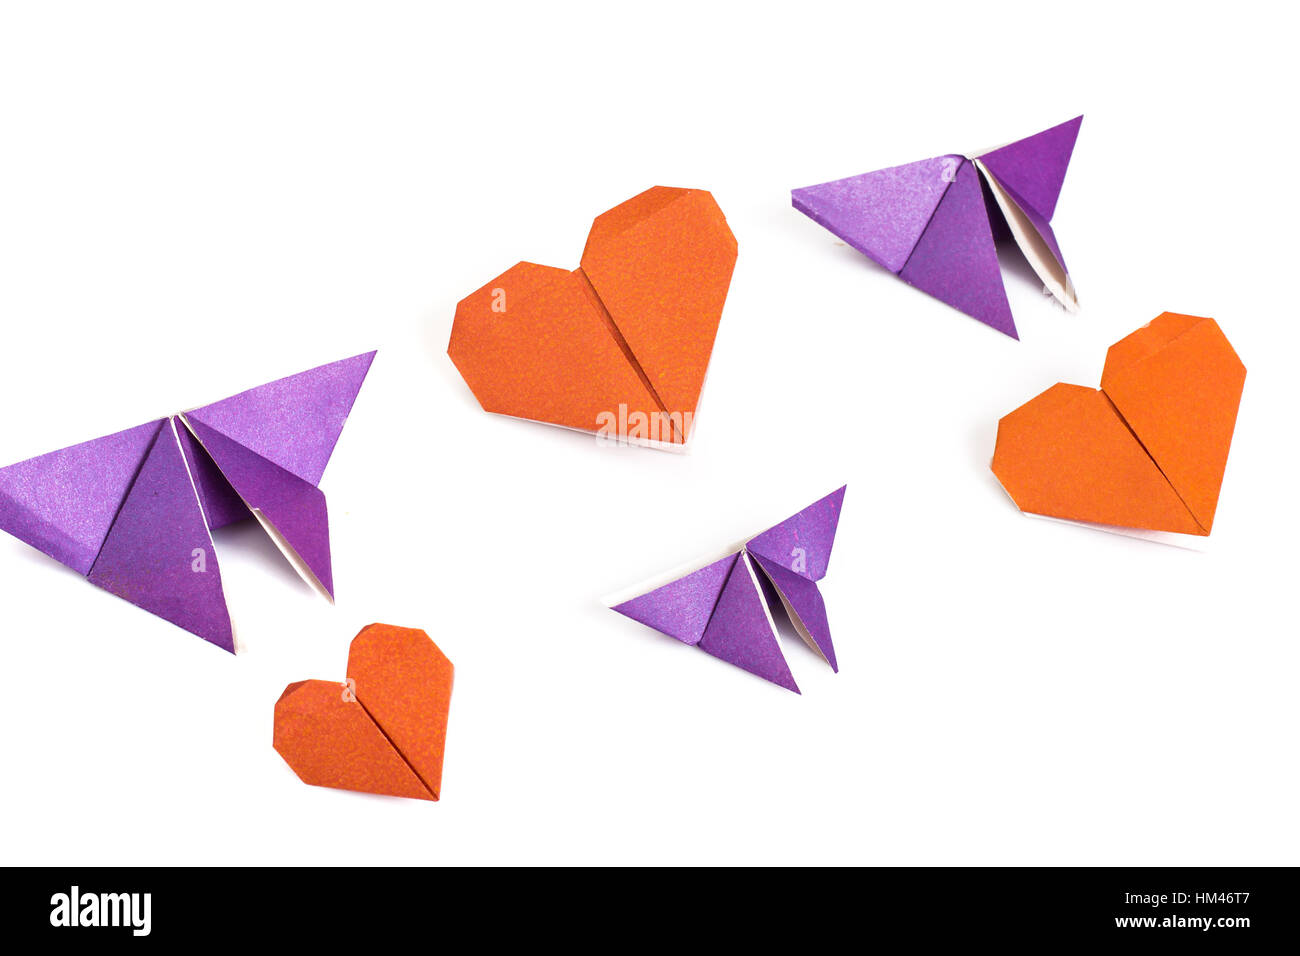 Origami heart and butterflies Stock Photo